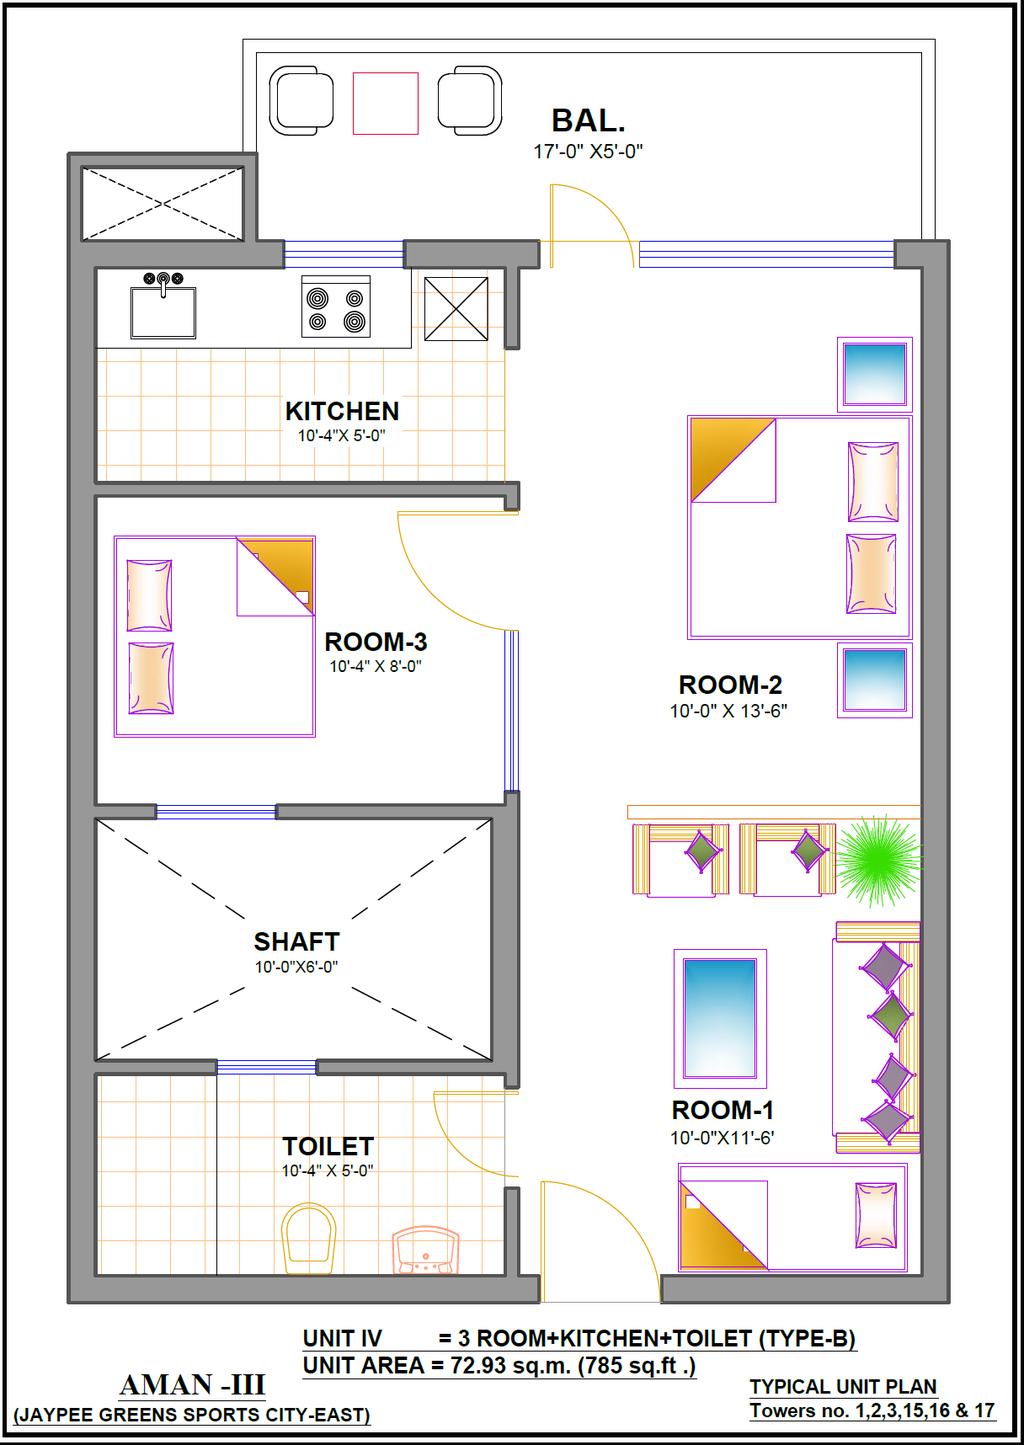 TYPICAL UNIT PLAN (CONCEPT) Note: The Super Area of the apartment as mentioned above is based on concept plans.